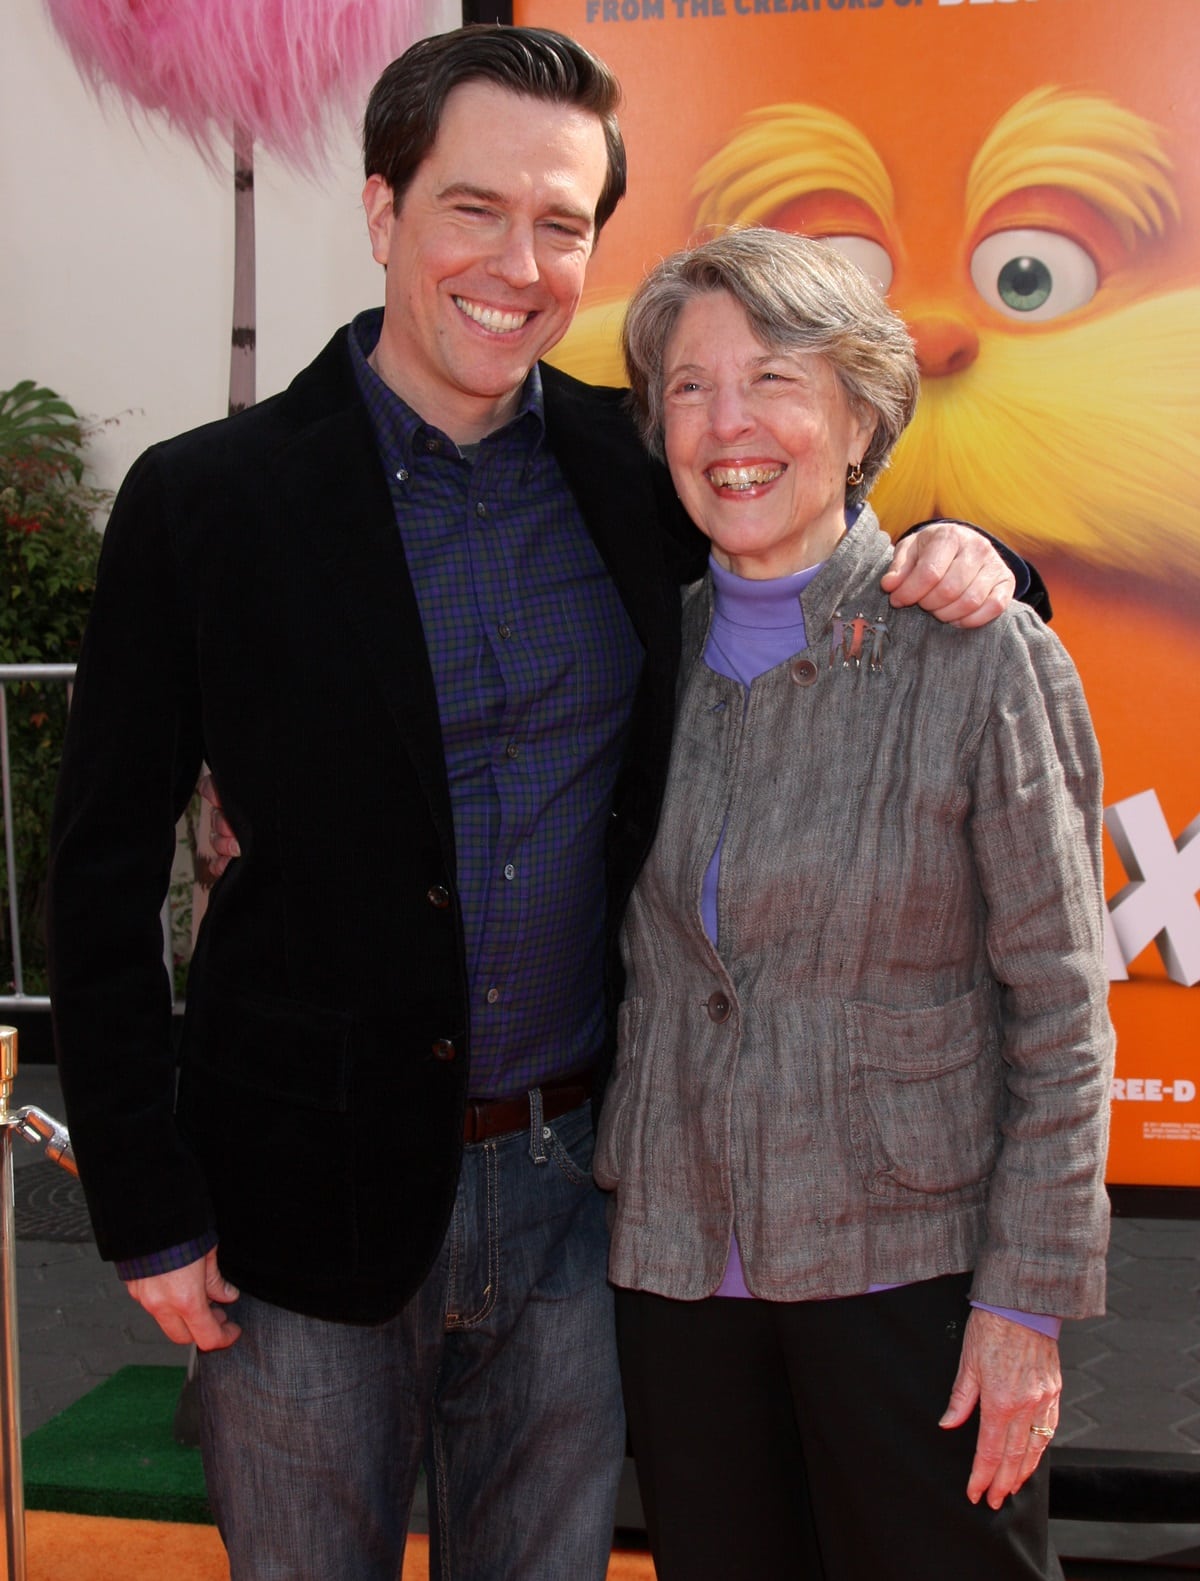 Actor Ed Helms with his mother, Pamela Parker, at the premiere of Dr. Seuss' "The Lorax"